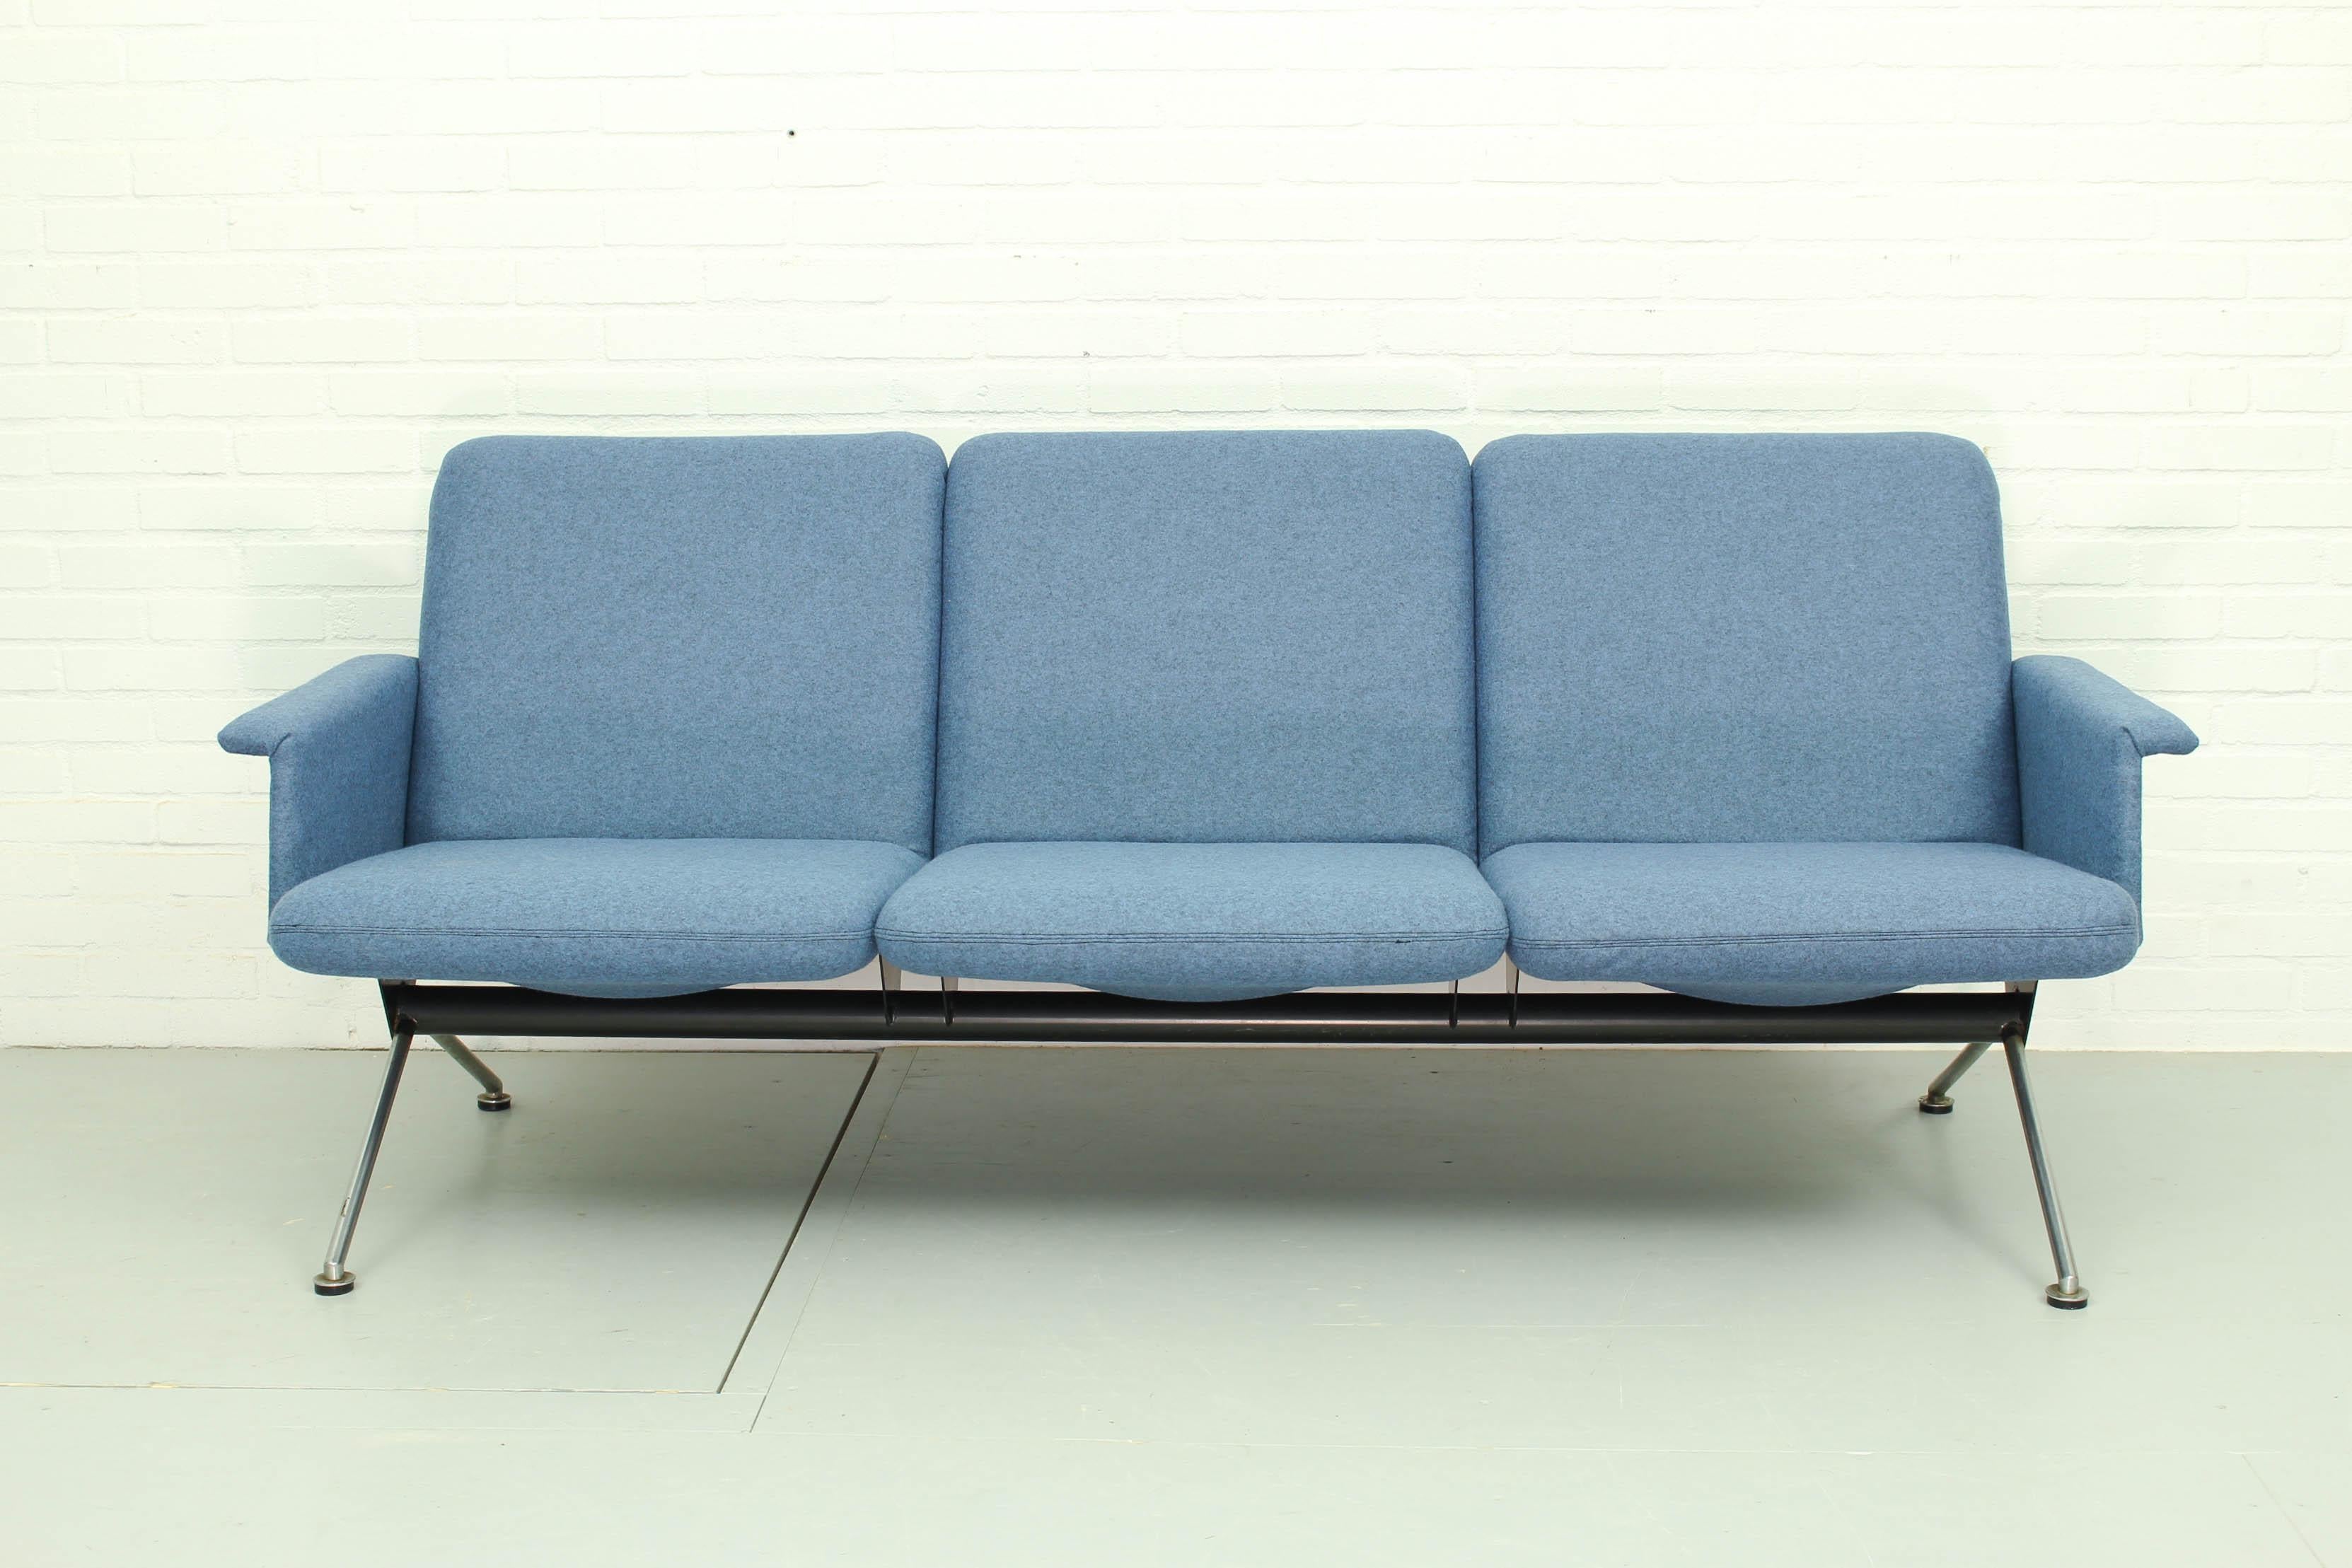 Very timeless and quite rare Mad Men like lounge set designed by Andre Cordemeyer in 1961 for Gispen. This industrial lounge set contains two armchairs (model 1531 and 1532) and a model 1715 sofa. The original chromed bases are in excellent